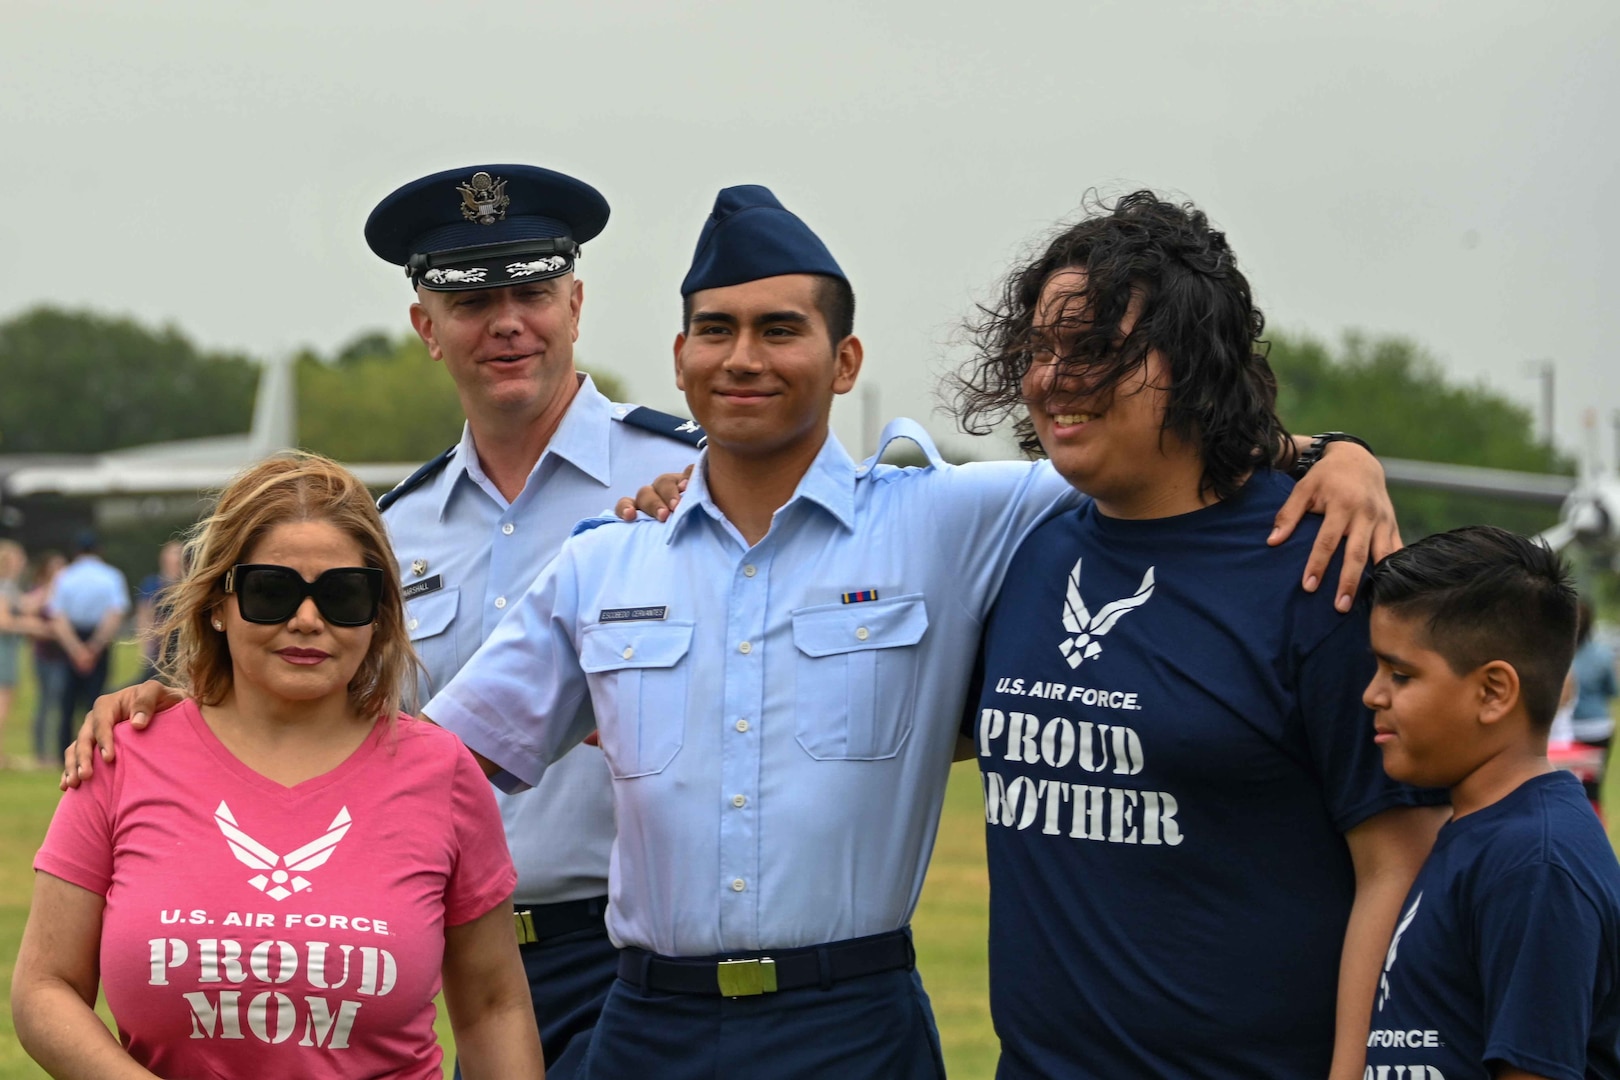 U.S. Air Force Col. Jeff Marshall, 97th Air Mobility Wing commander, congratulates Airman Joshua Omar Escobedo Cervantes, Air Force Basic Military Training graduate, at Joint Base San Antonio-Lackland, Texas, May 16, 2024. Marshall administered the oath of enlistment to the 494 graduating Airmen before they were released to their families. (U.S. Air Force photo by Senior Airman Kari Degraffenreed)